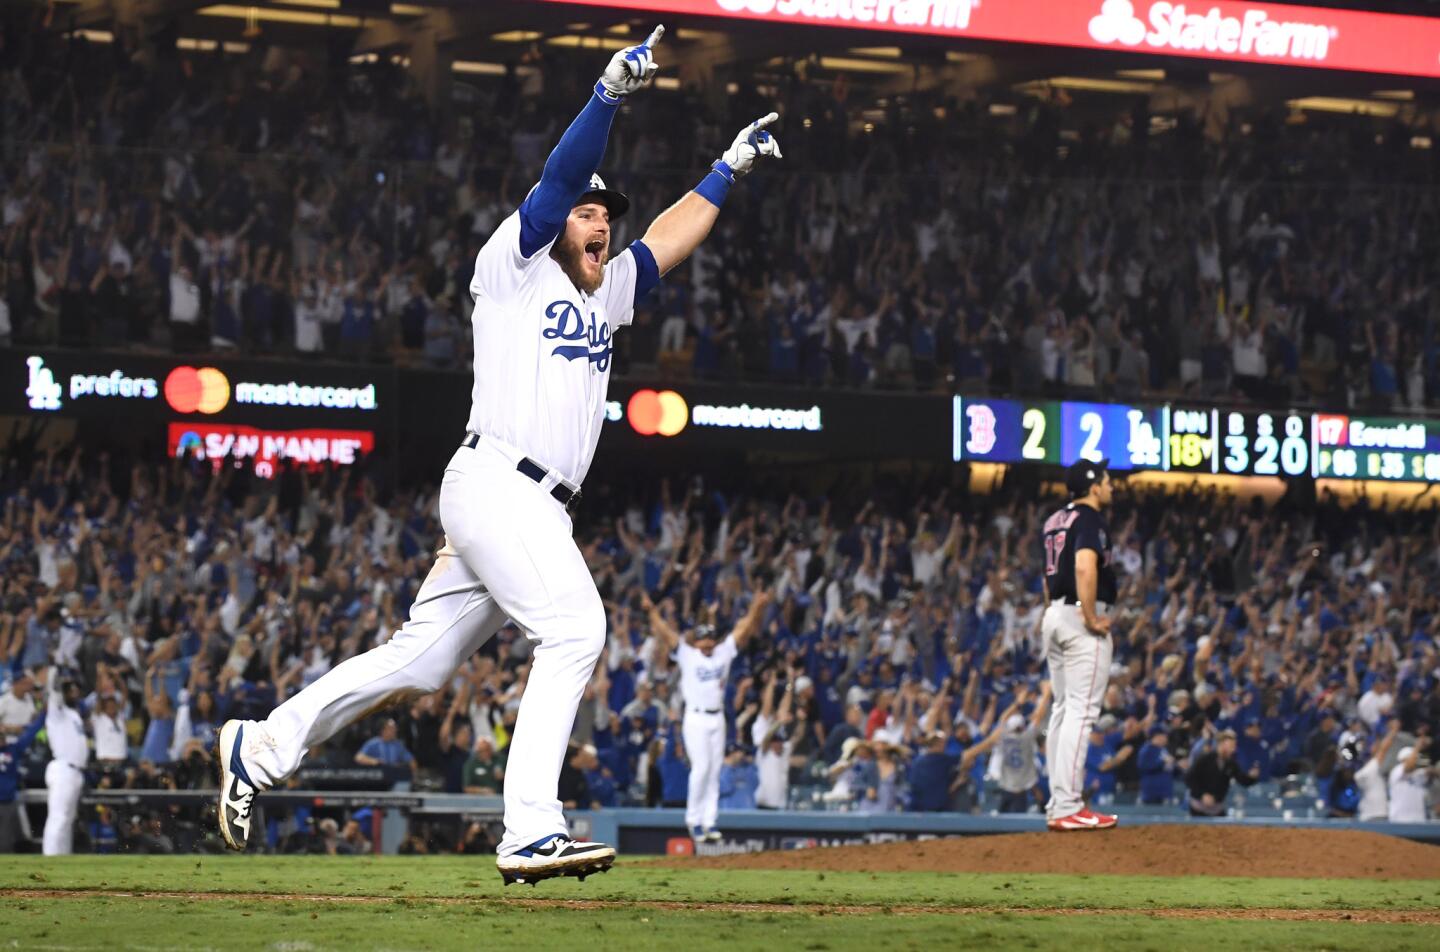 Dodgers Max Muncy hits the game-winning home run against the Red Sox in the bottom of the 18th inning.